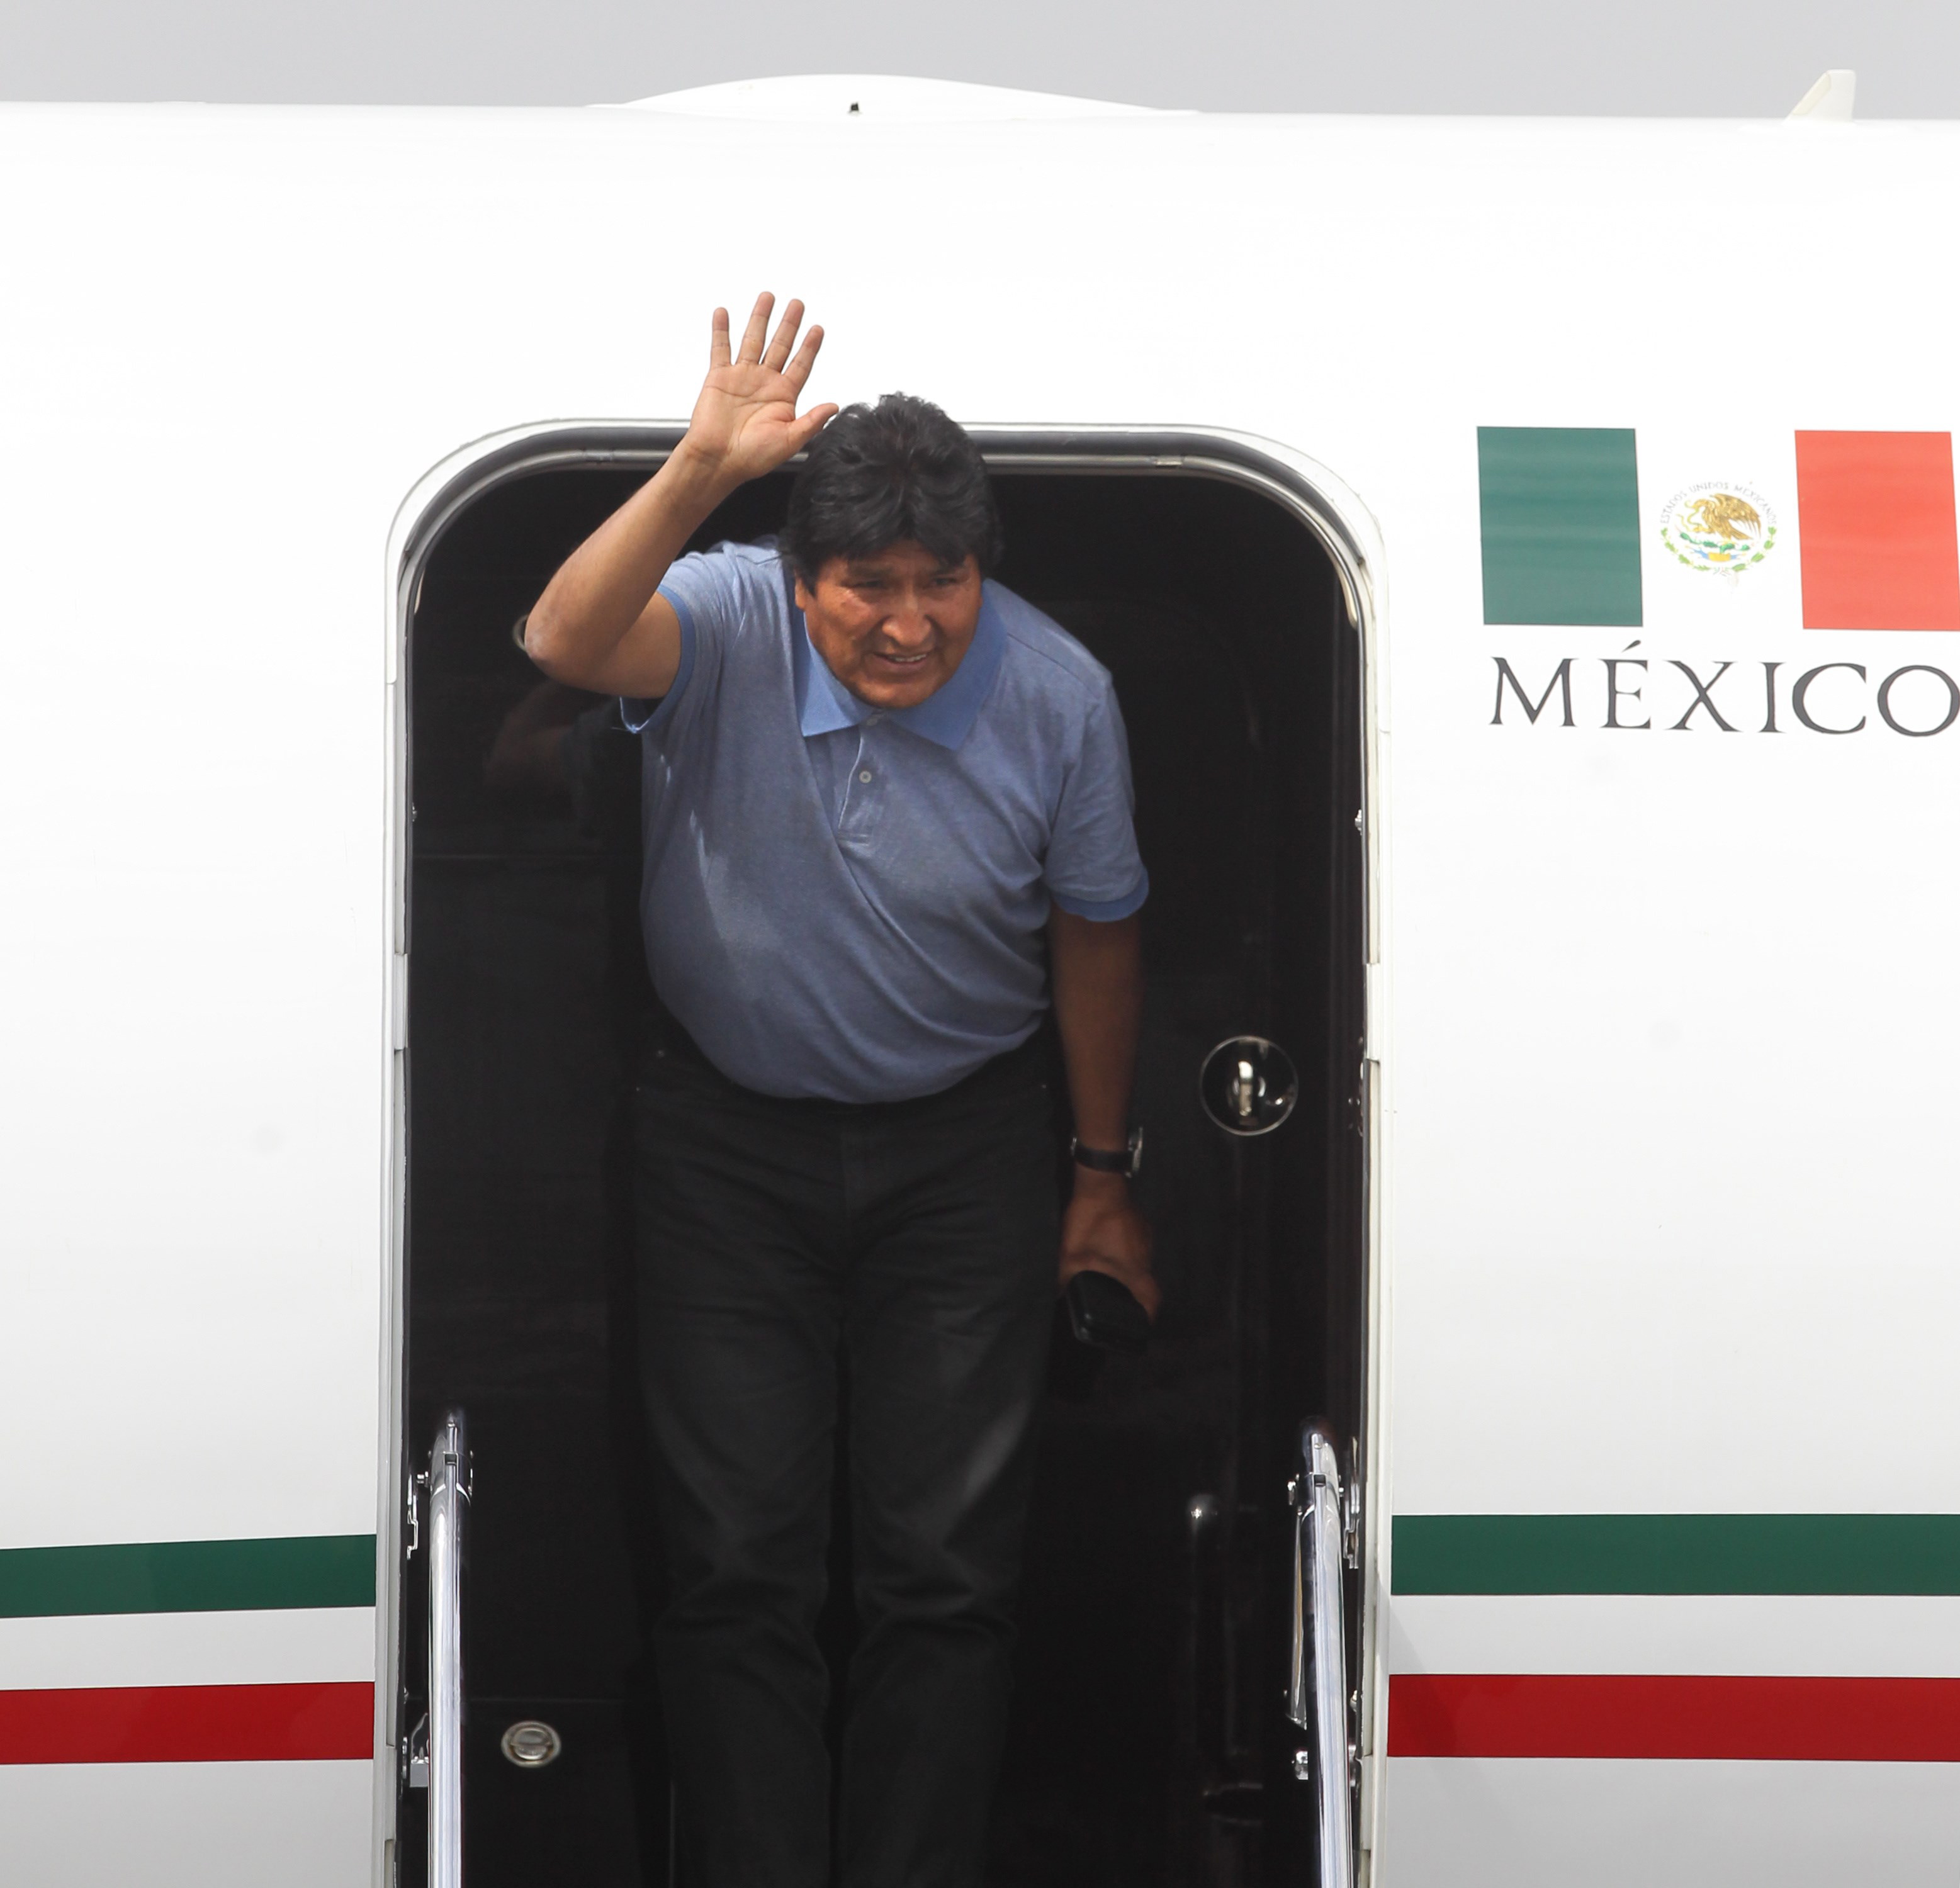 epa07991454 Former President of Bolivia Evo Morales arrives to the International Airport of Mexico City, Mexico, 12 November 2019. Evo Morales, who resigned on 10 November, arrived to Mexico to claim asylum onboard a plane of the Mexican Air Force that left Bolivia last night.  EPA/Mario Guzmán